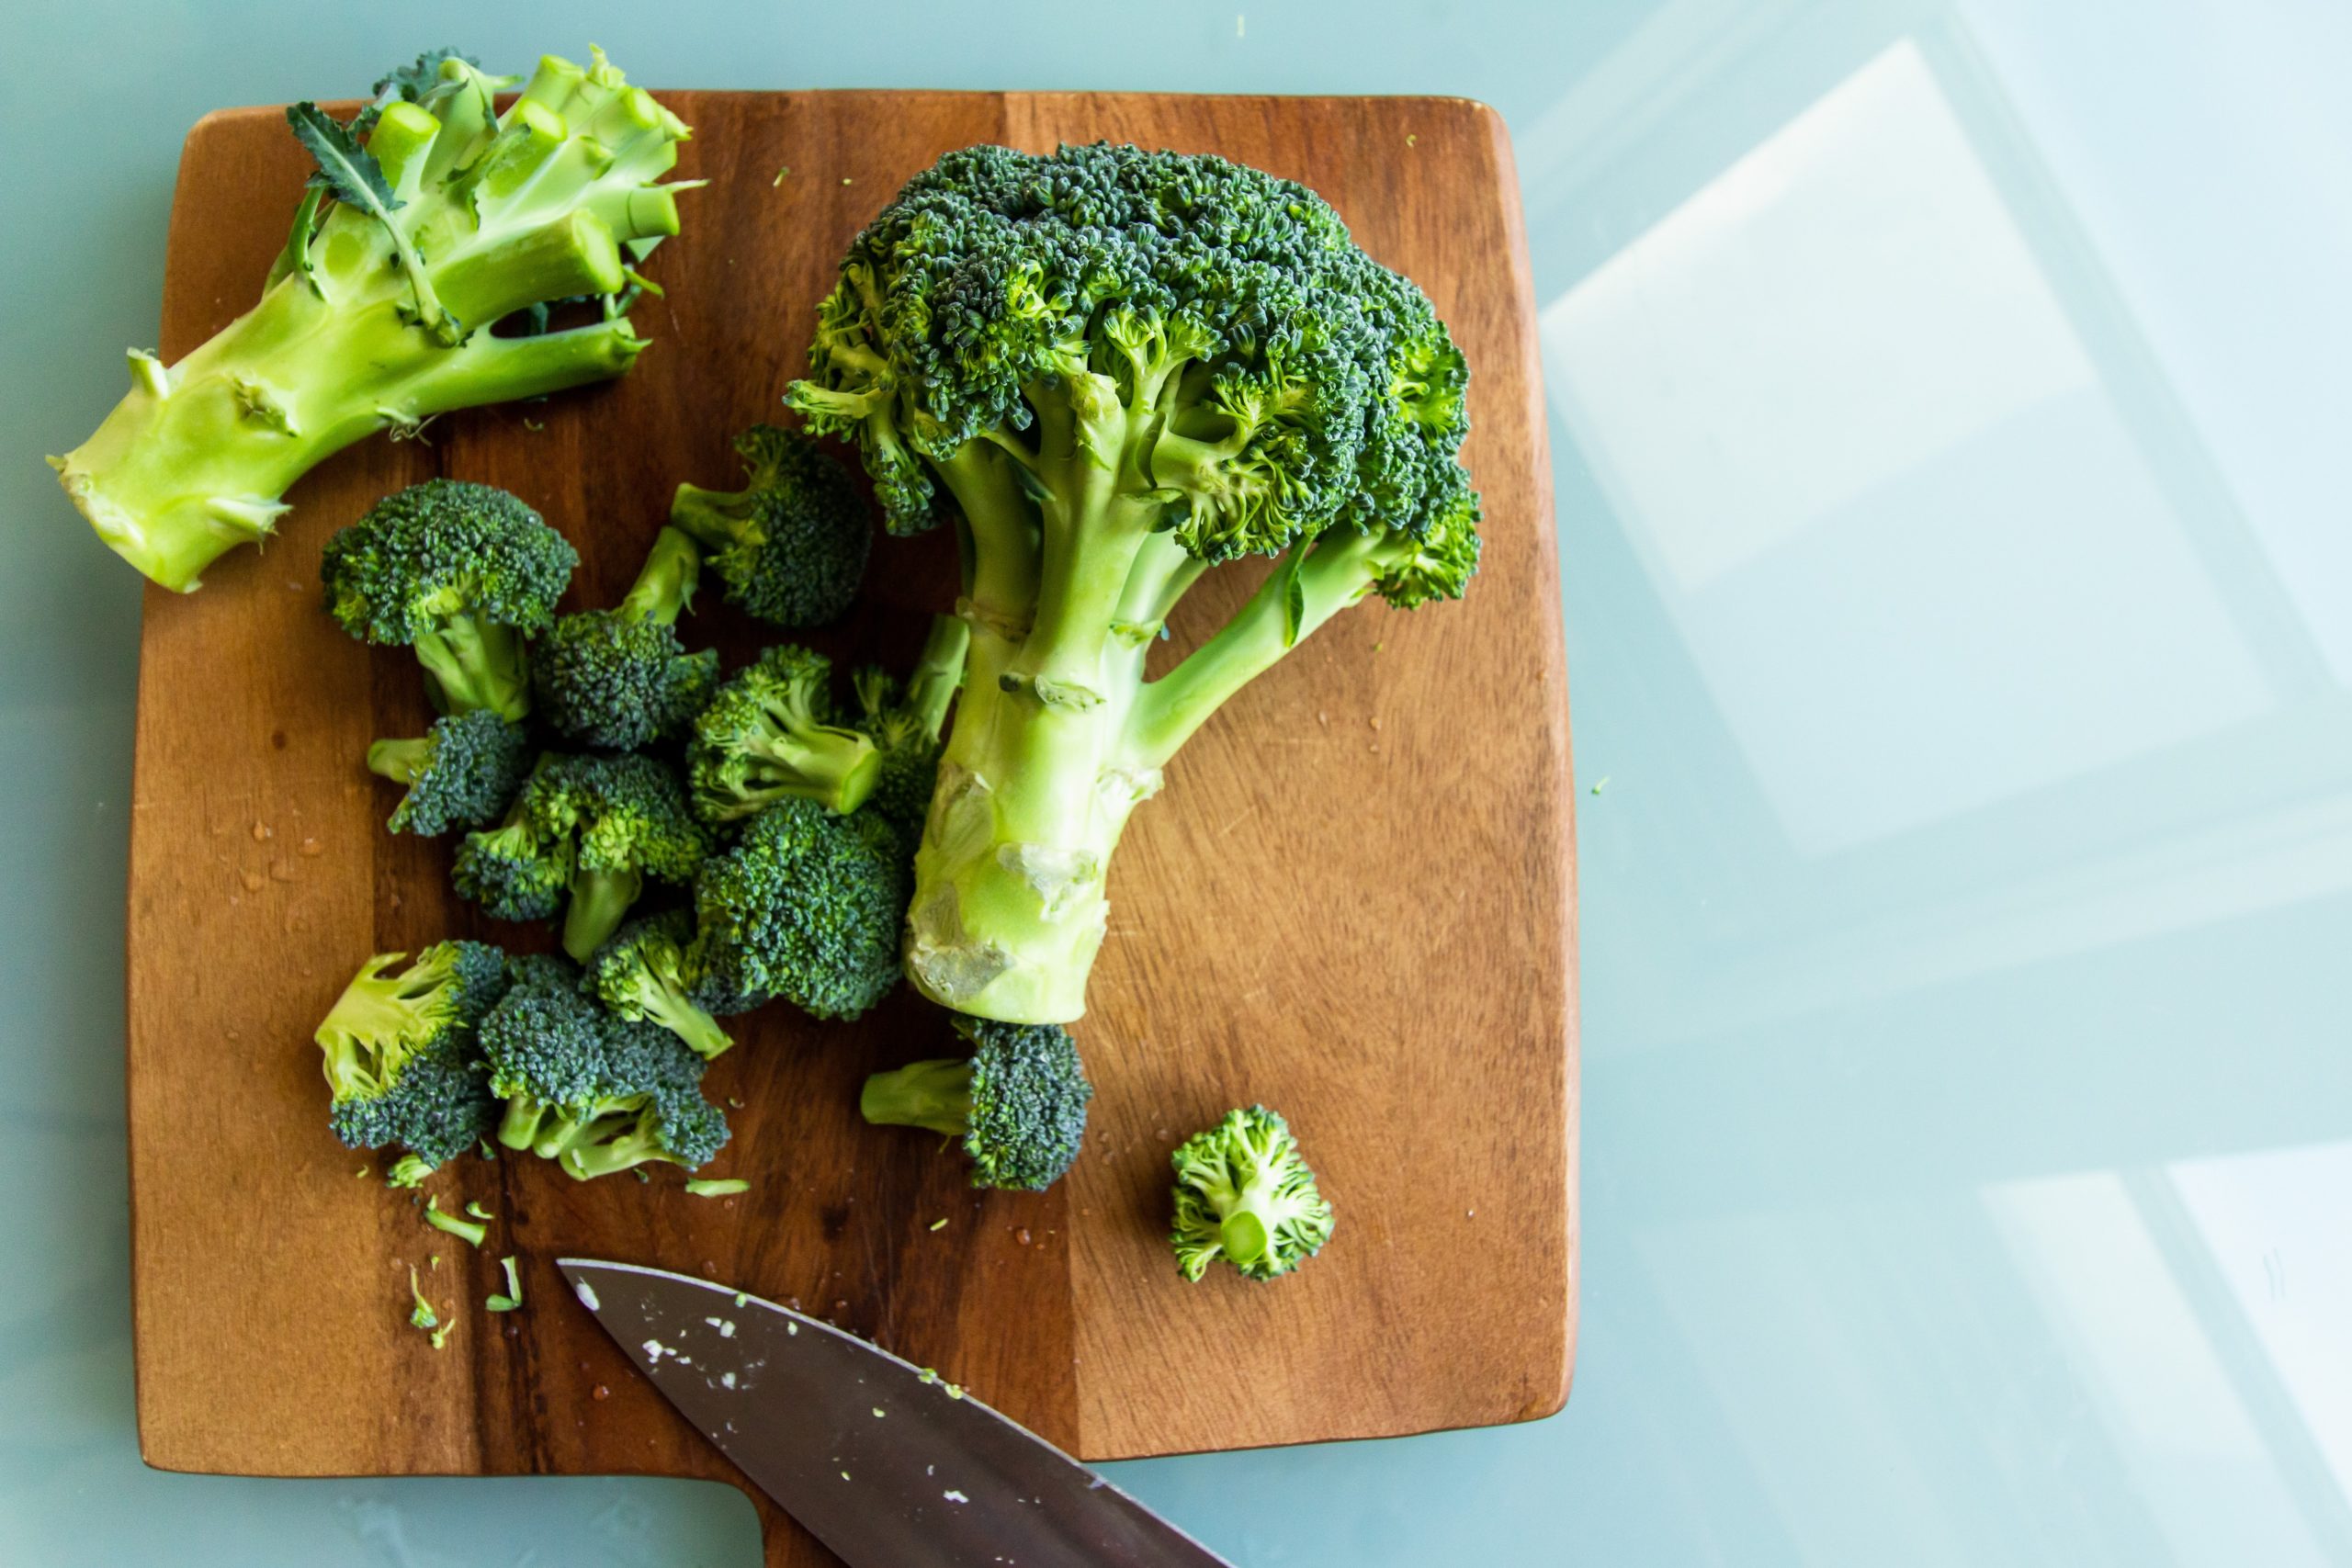 Two heads of broccoli on a chopping board. Broccoli is a good source of folate.